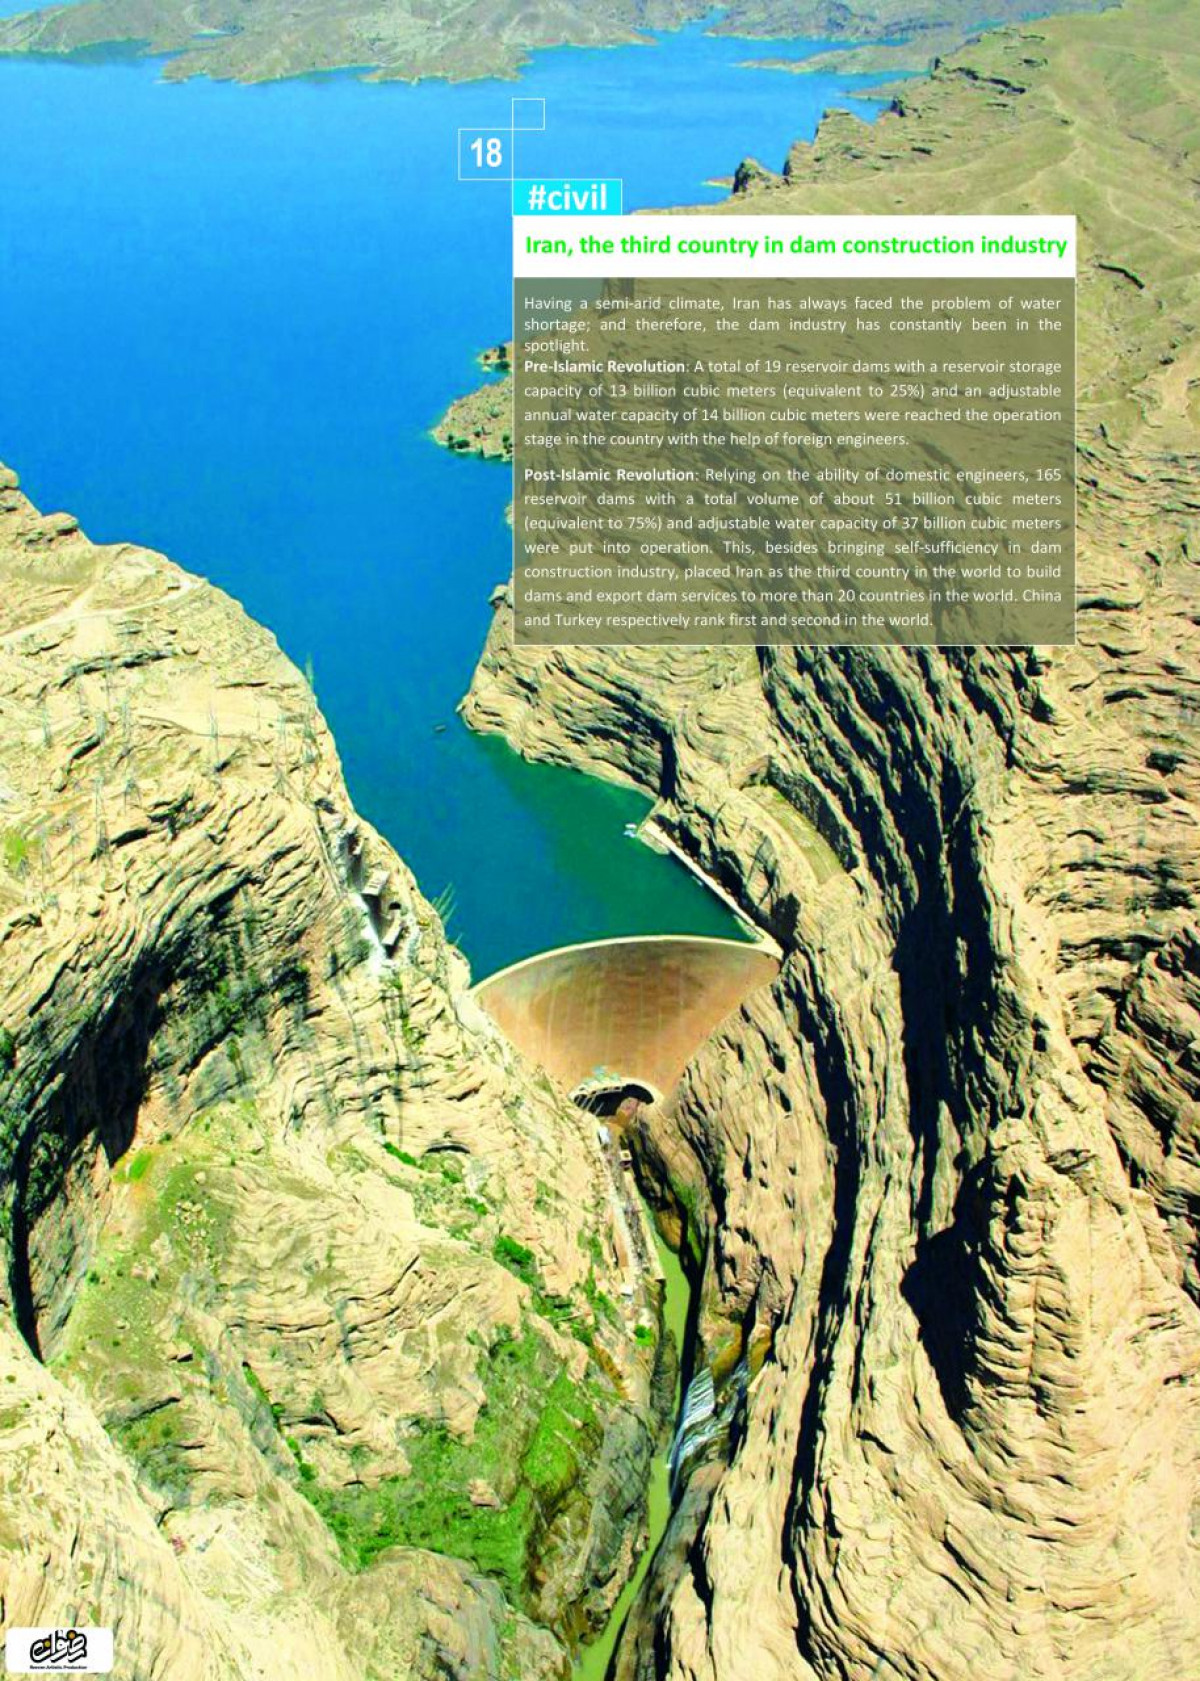 Iran, the third country in dam construction industry